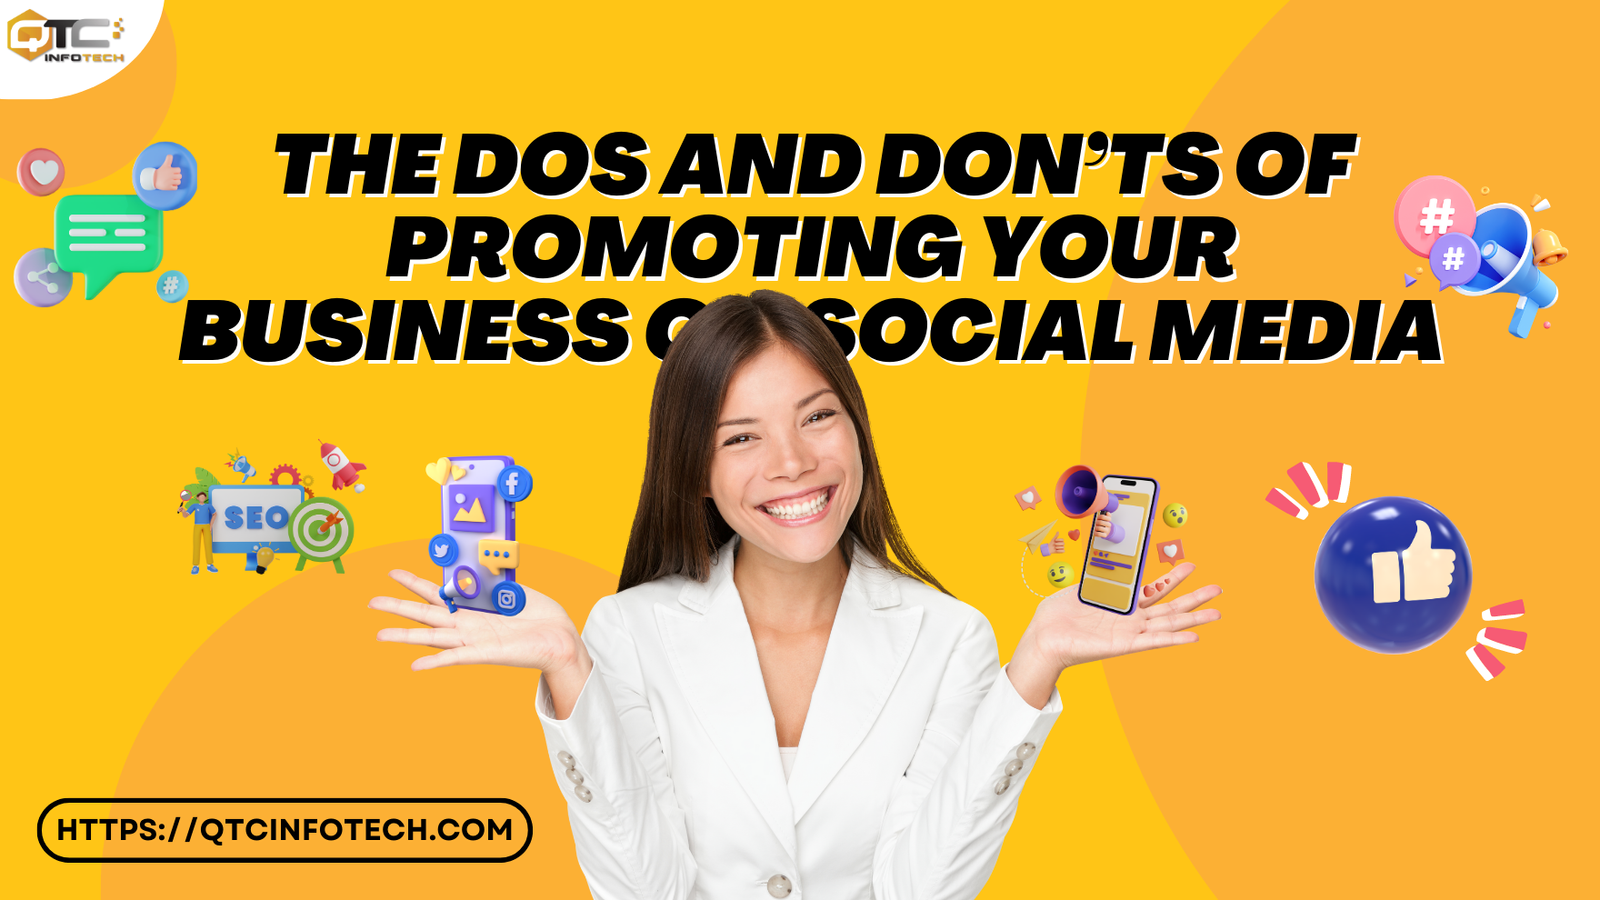 The Dos and Don’ts of Promoting Your Business on Social Media